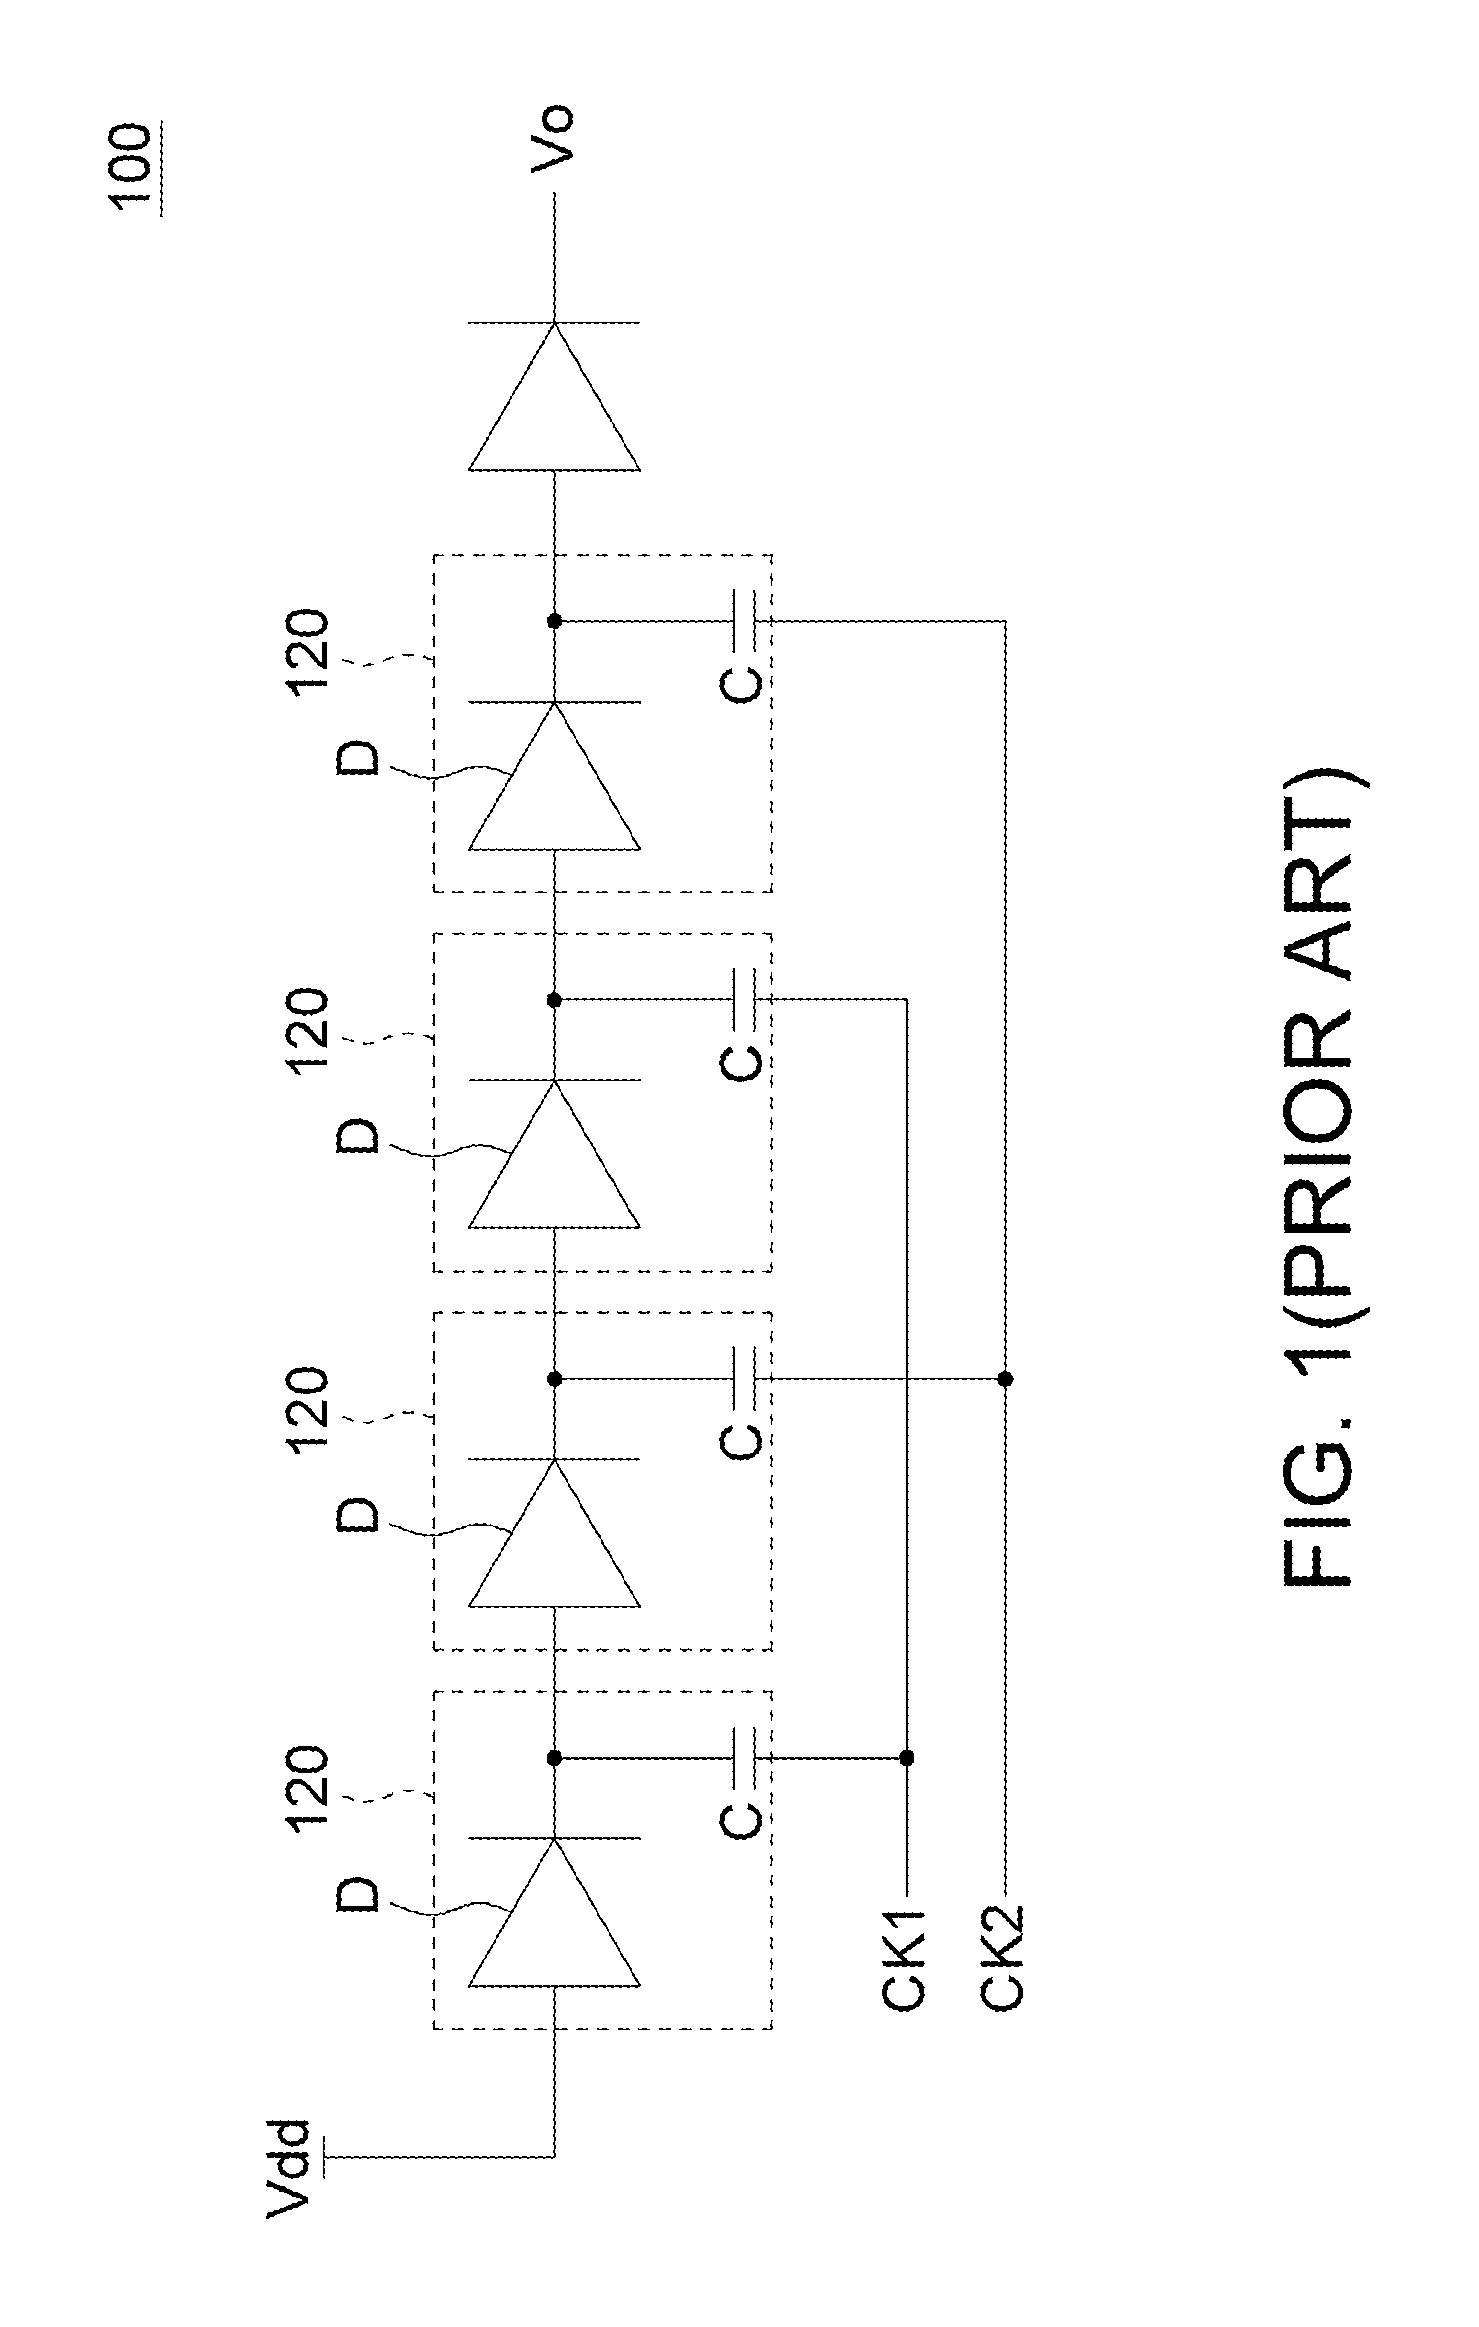 Multiple-Stage Charge Pump with Charge Recycle Circuit